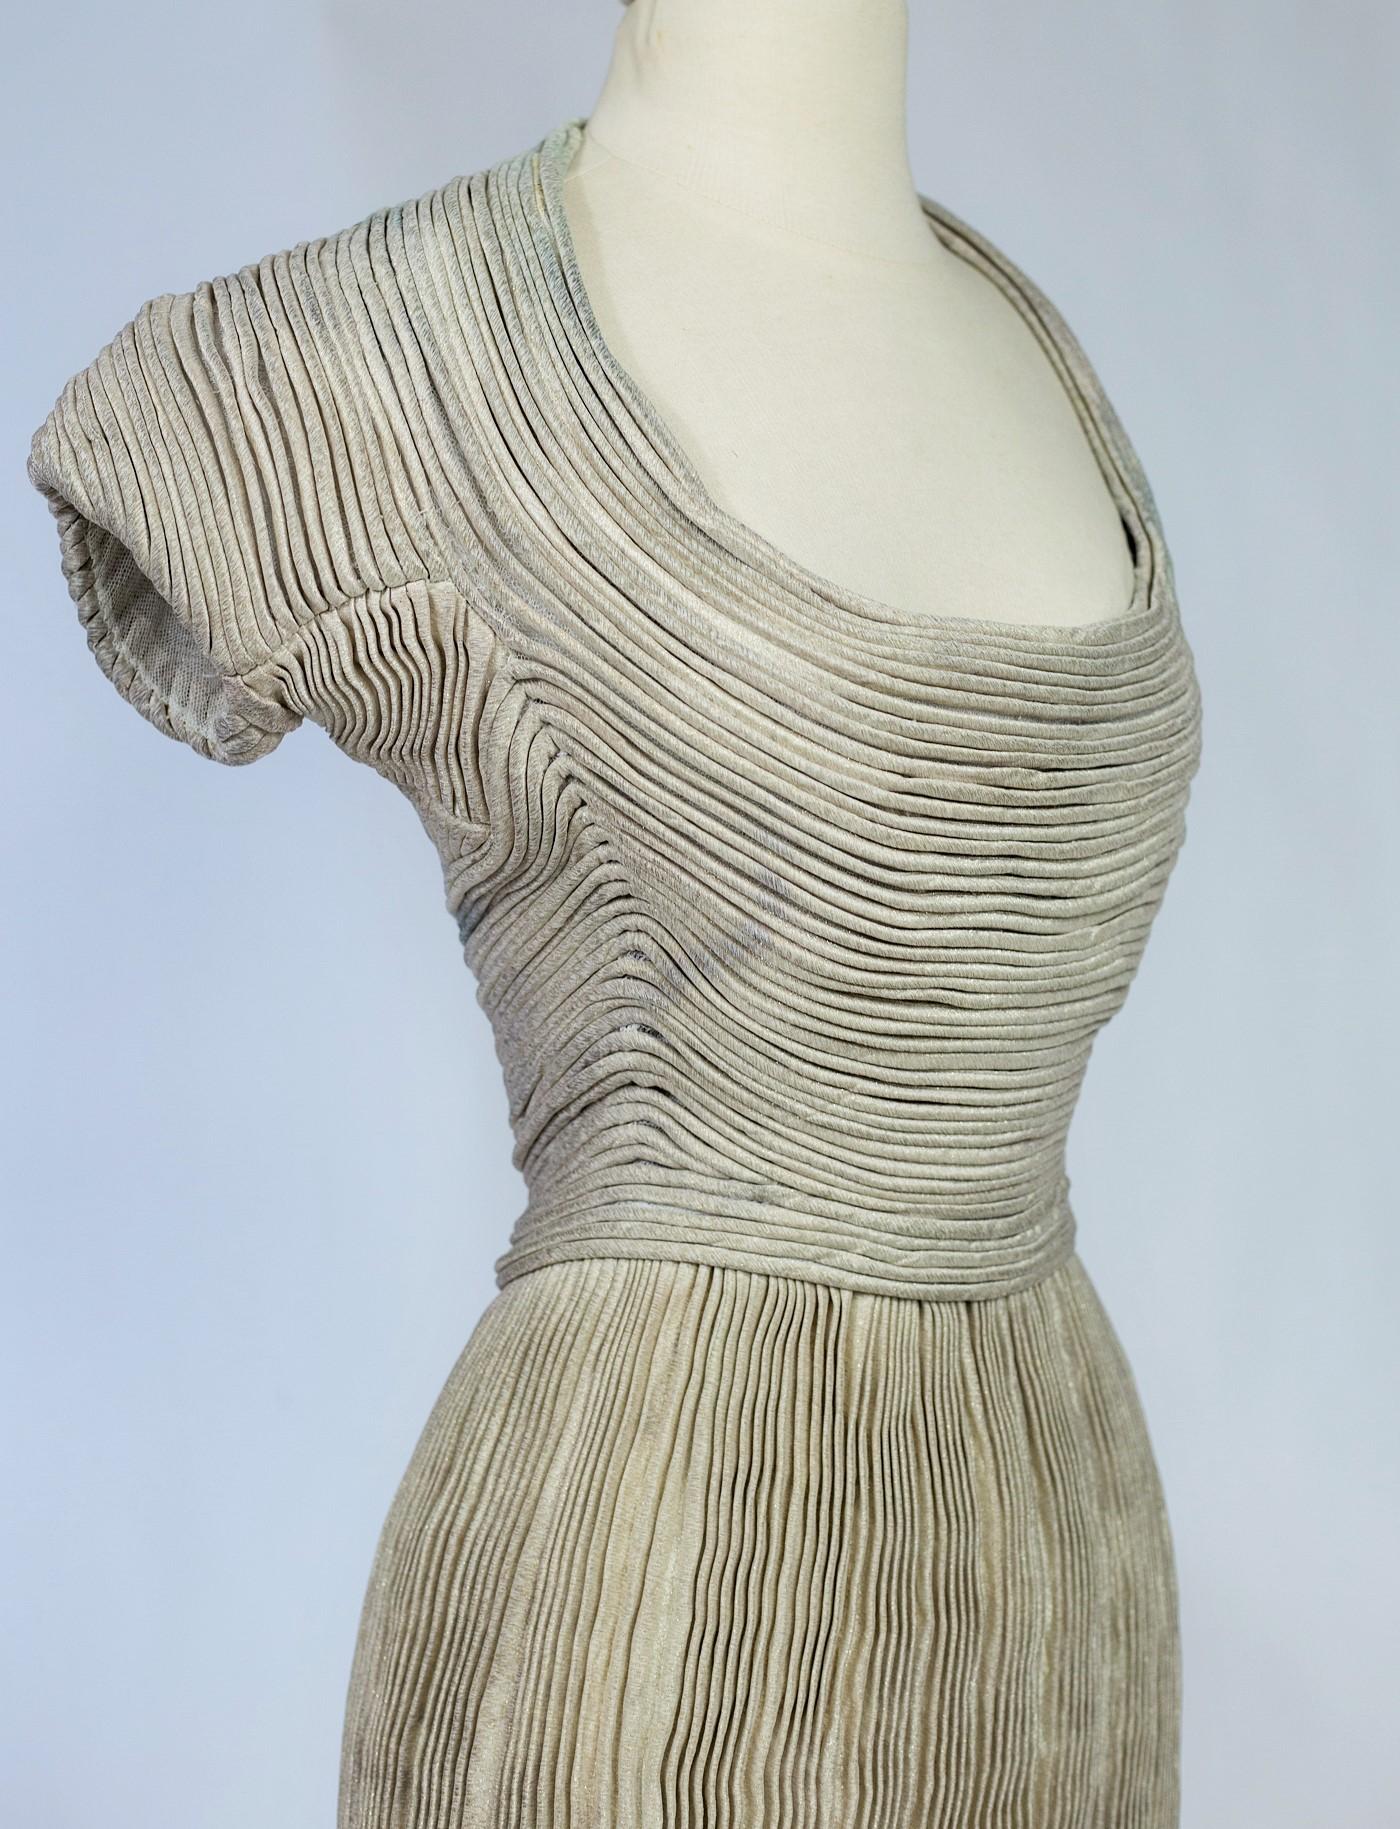 Circa 1940
France
Sculptural silver lamé evening dress with a large oval neckline and small kimono sleeves by Lucile Manguin, member of the French haute couture union and daughter of the painter Fauve, dated 1938 - 1942. Amazing work of quilting